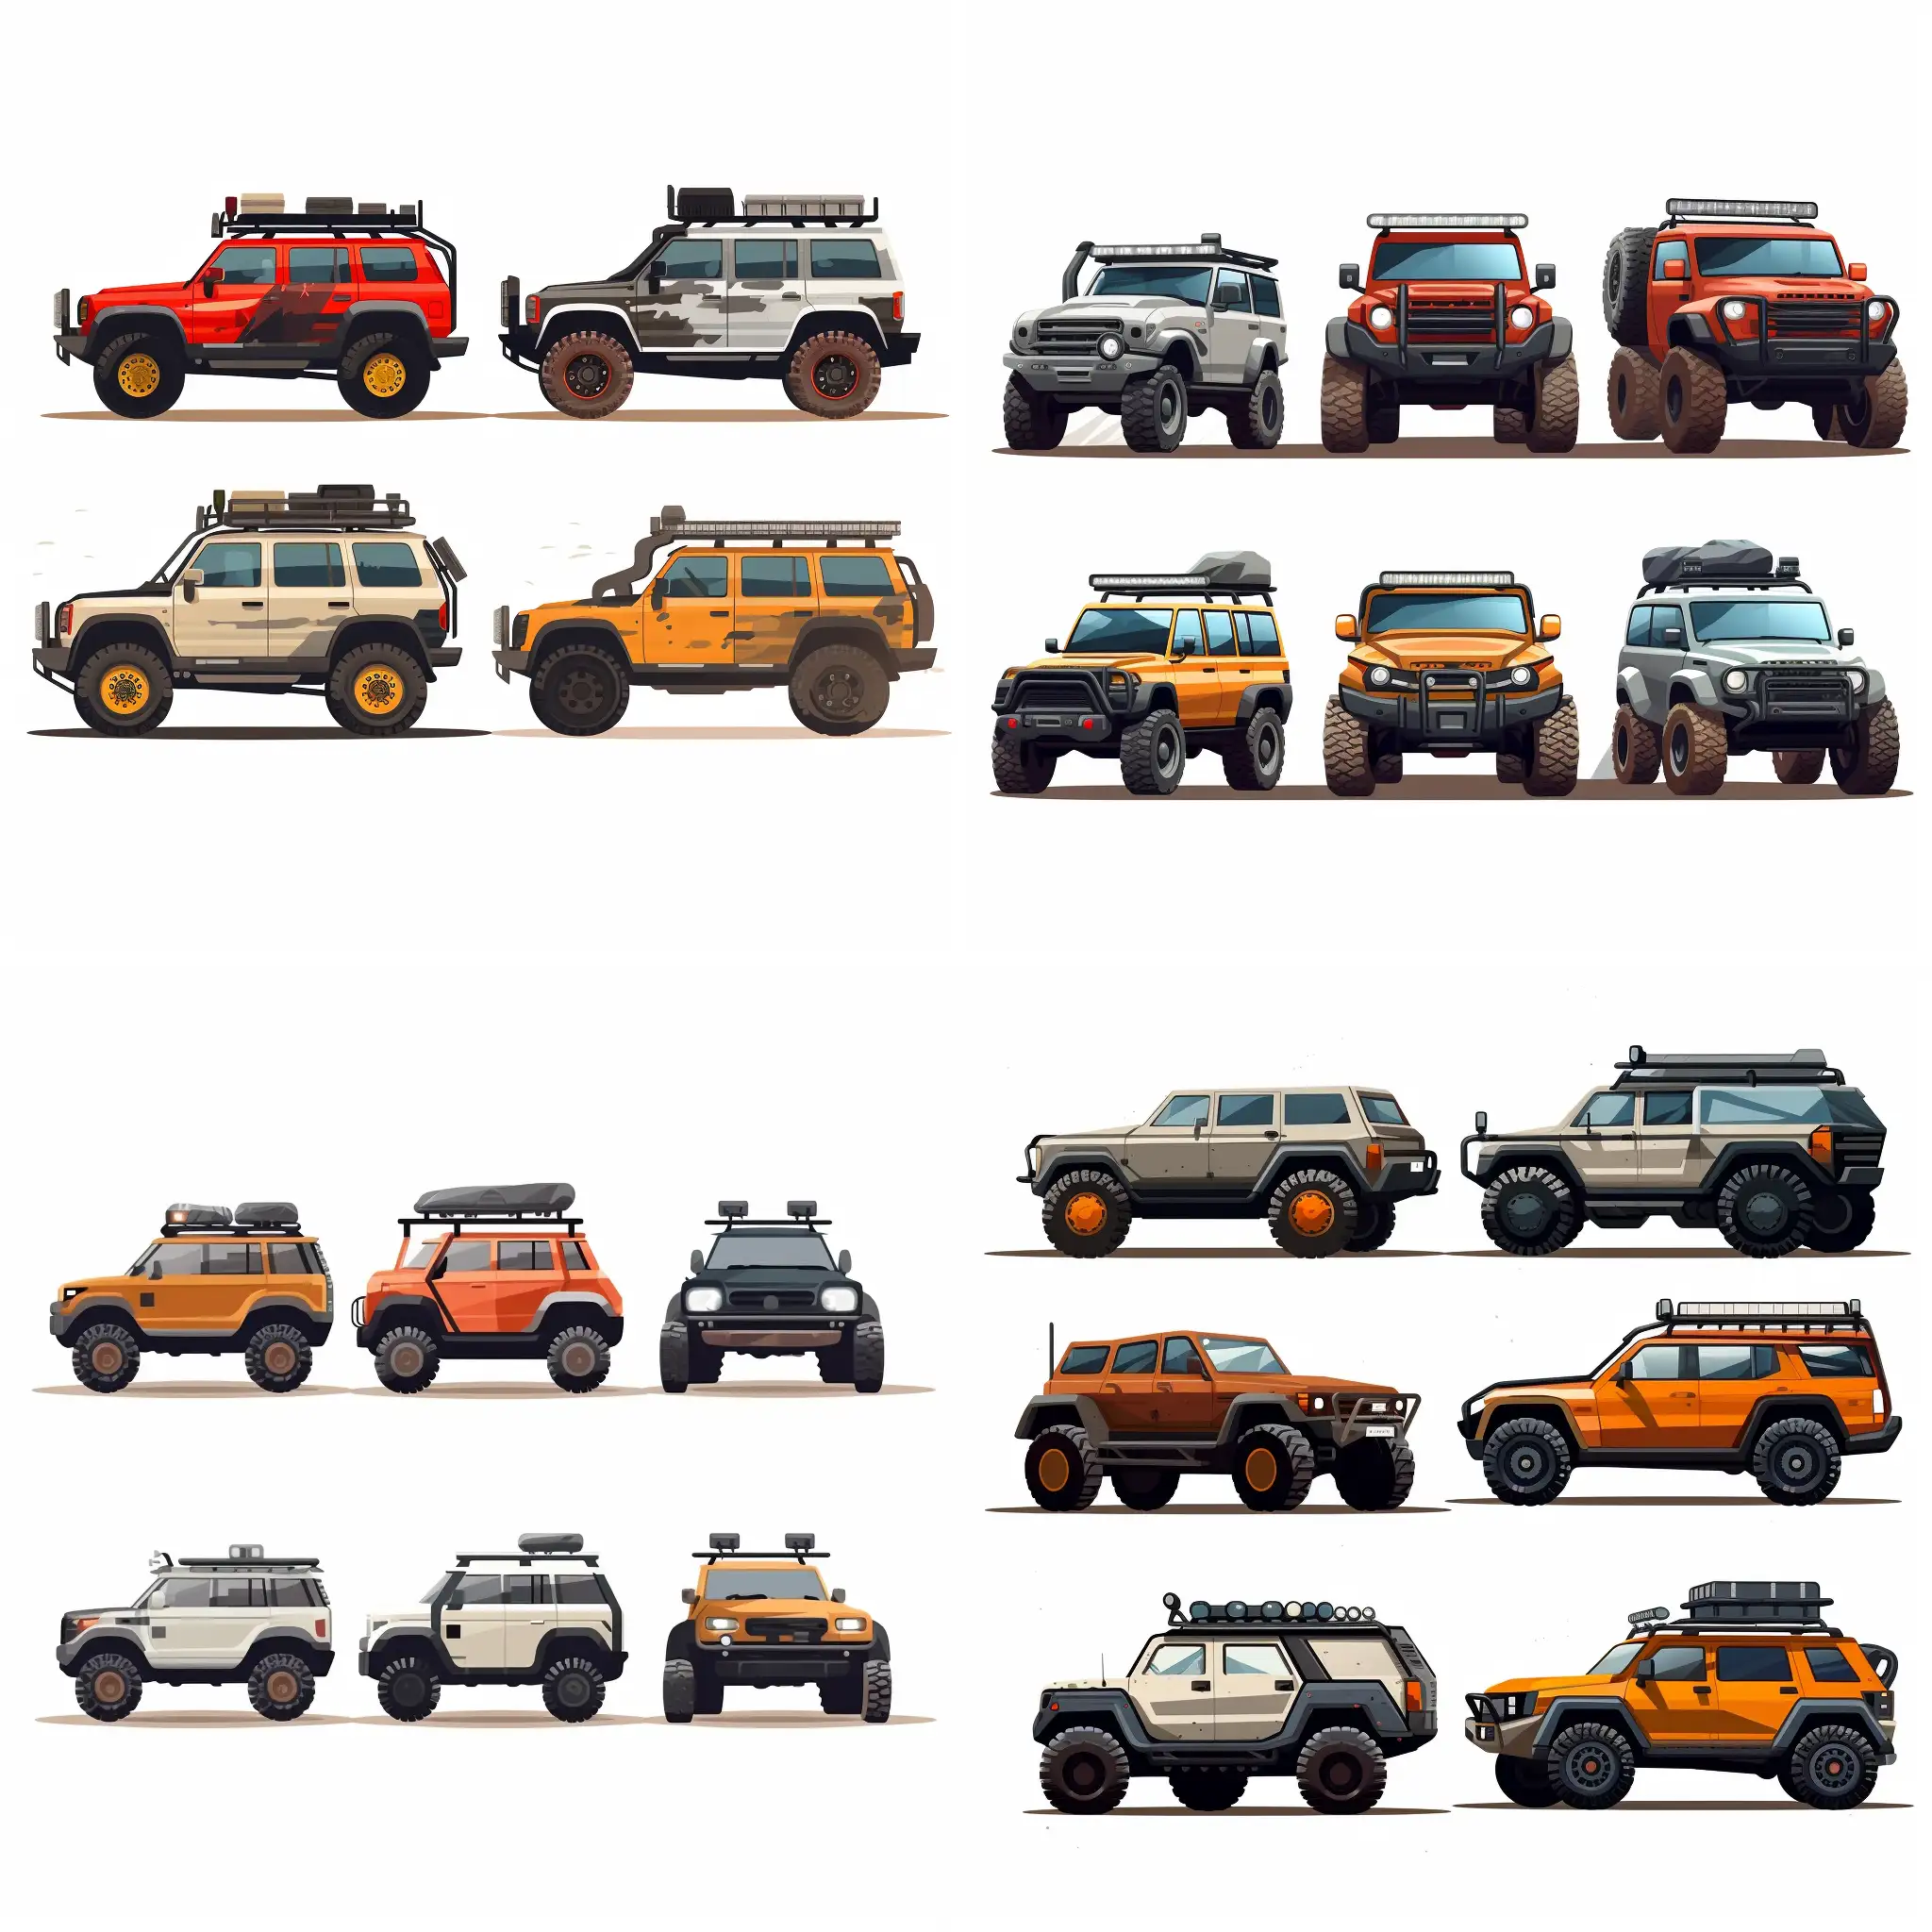 Futuristic-OffRoad-Cars-with-Oversized-Tires-in-2D-Flat-Colors